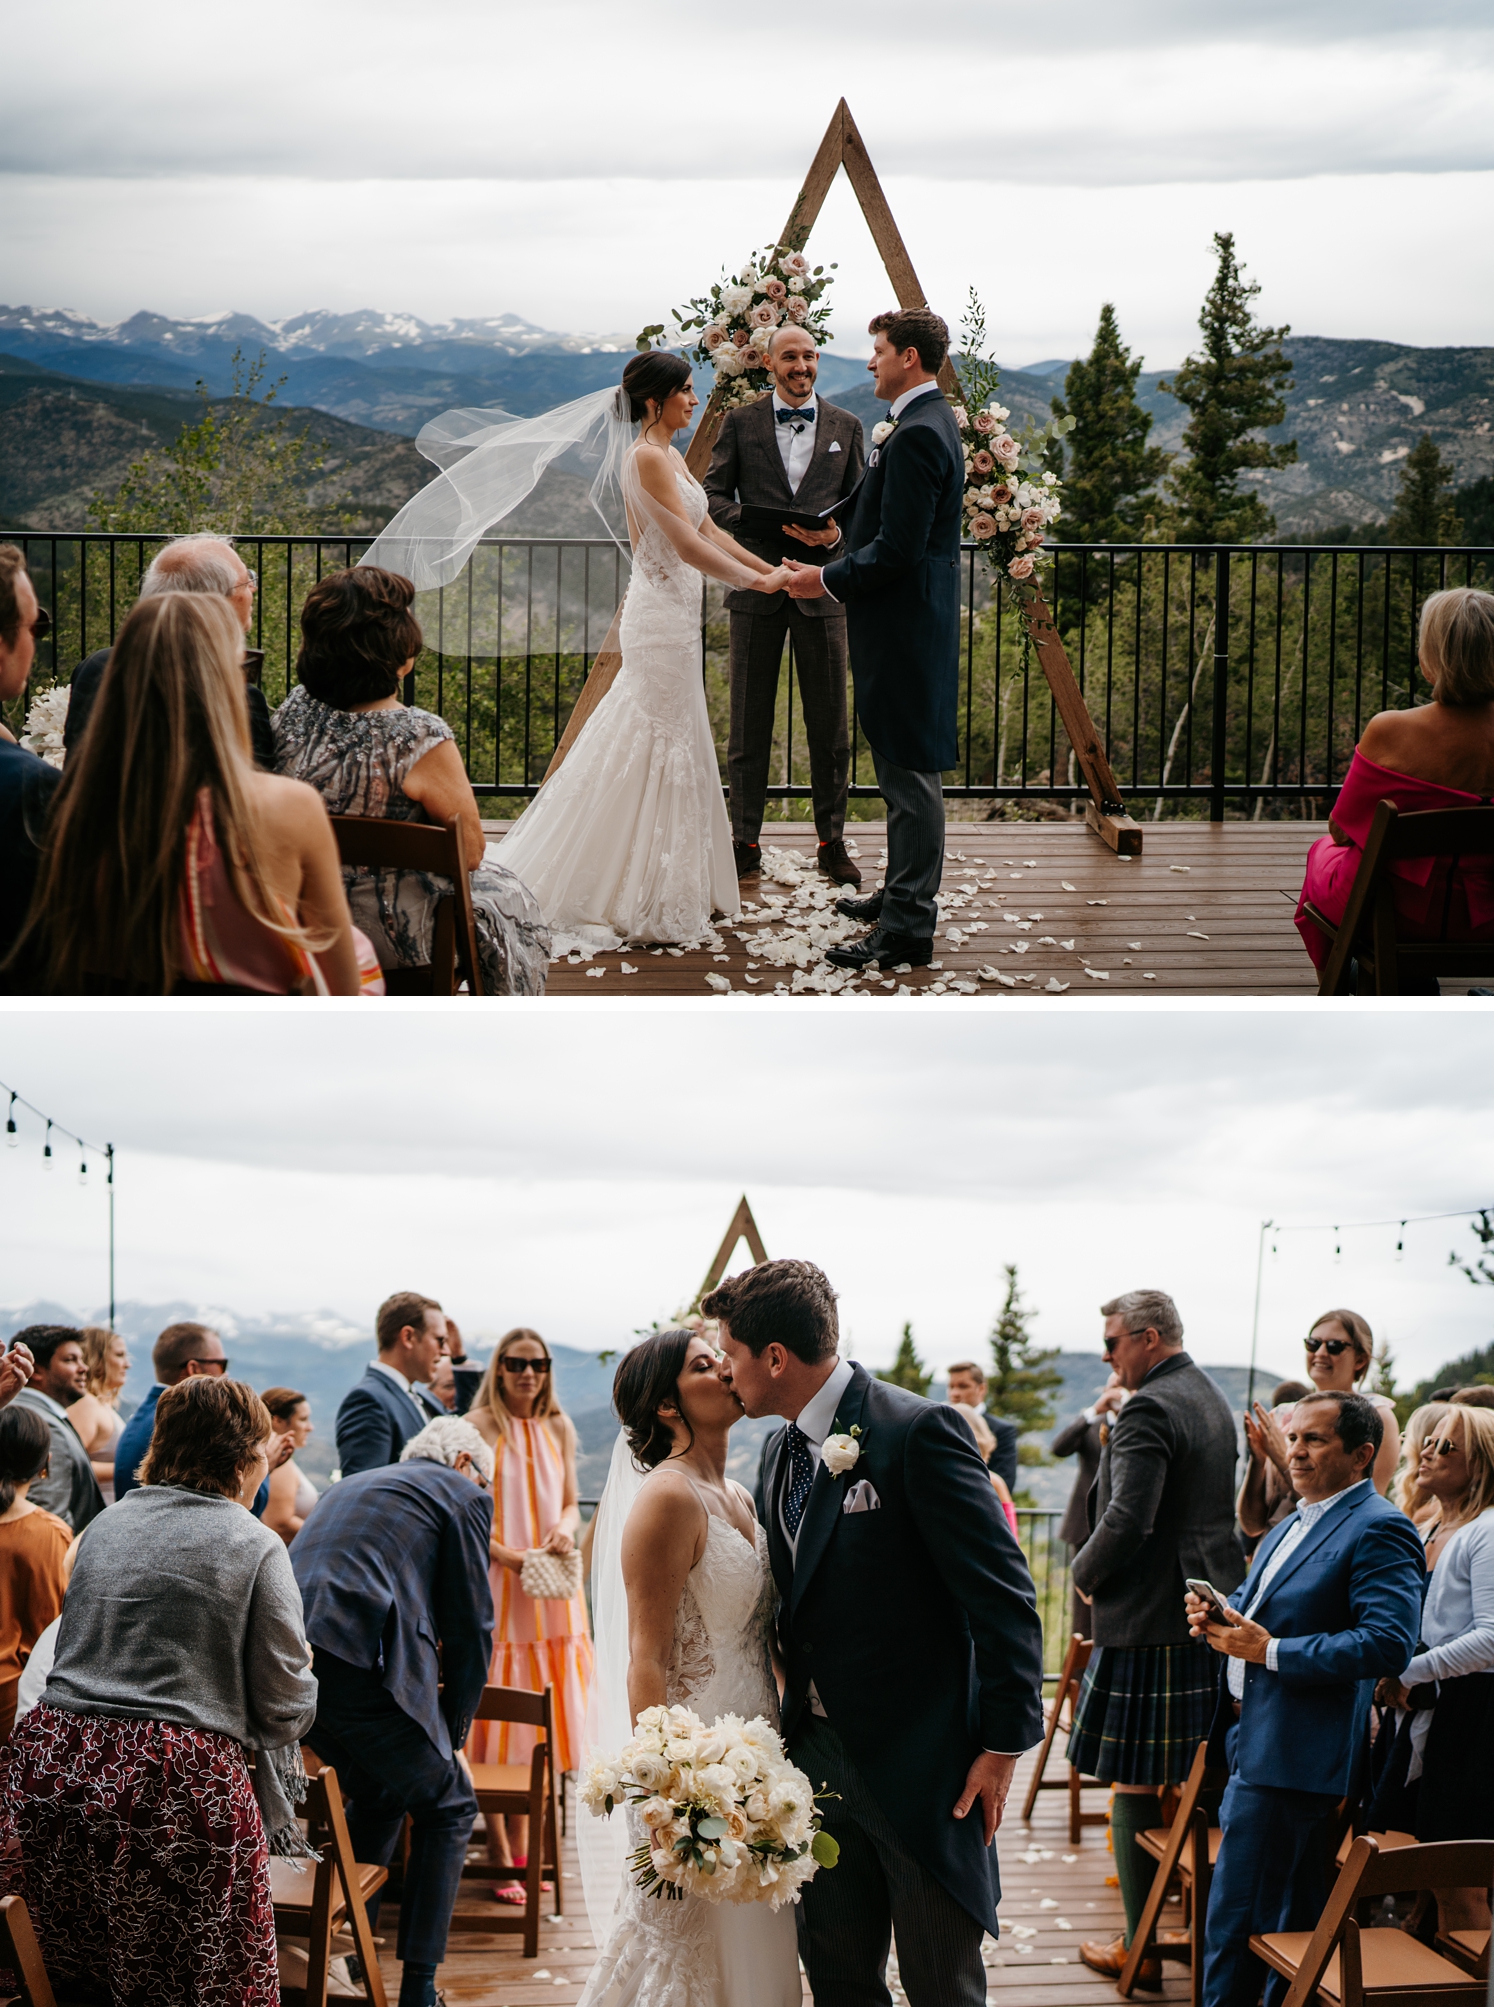 Bride and groom exchanging vows in front of triangle arch | bride and groom kissing after ceremony at North Star Gatherings | McArthur Weddings and Events